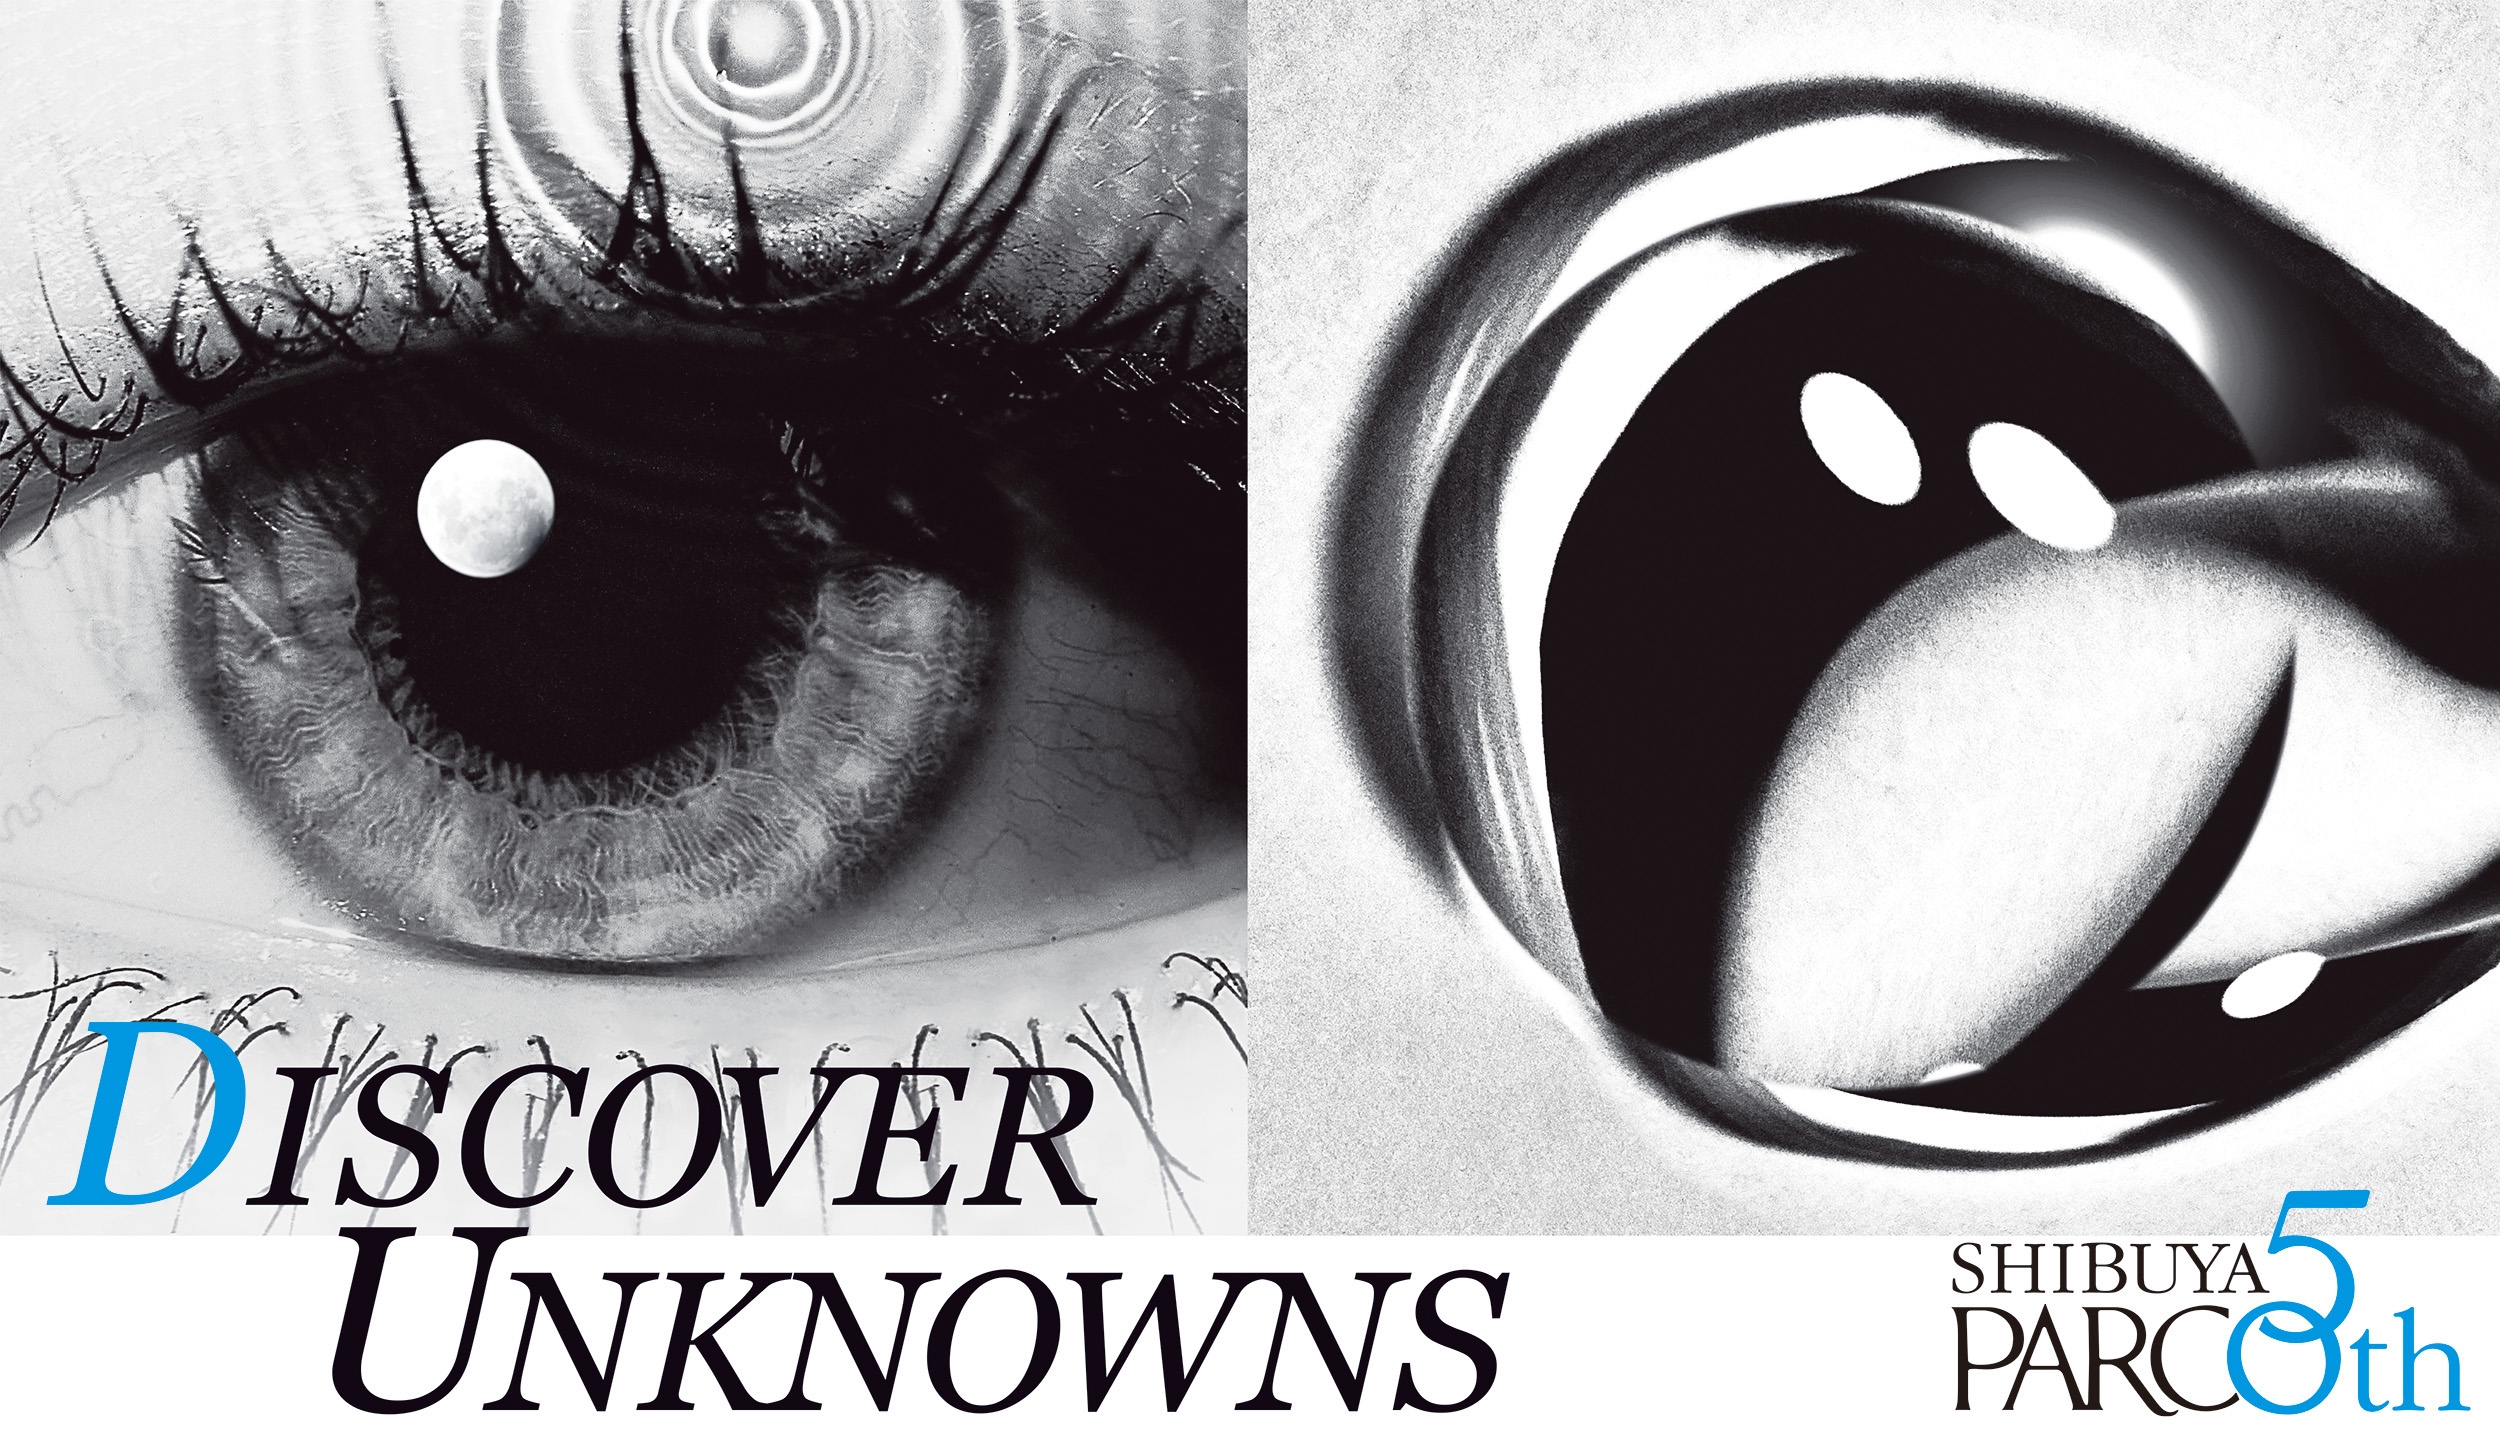 SHIBUYA+PARCO+50TH+ANNIVERSARY+DISCOVER+UNKNOWNS